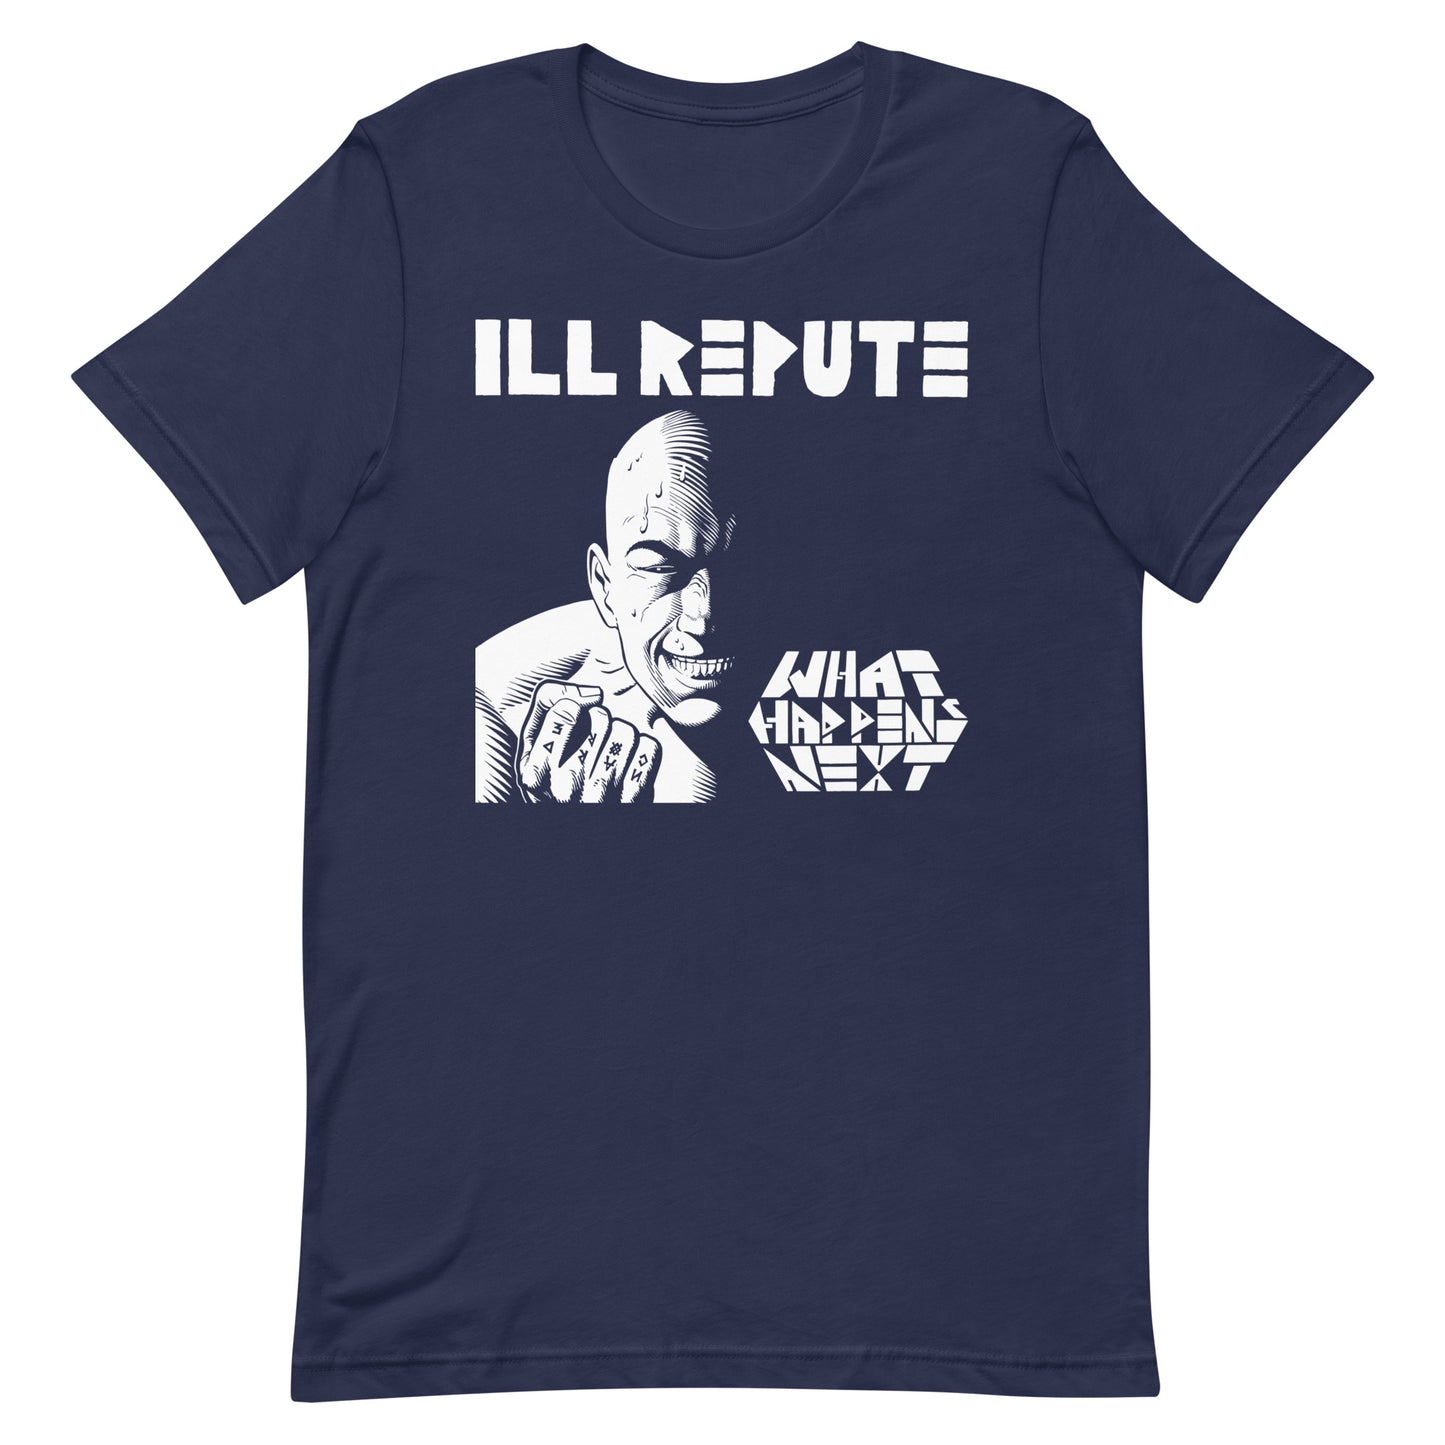 Ill Repute - What Happens Next T-Shirt